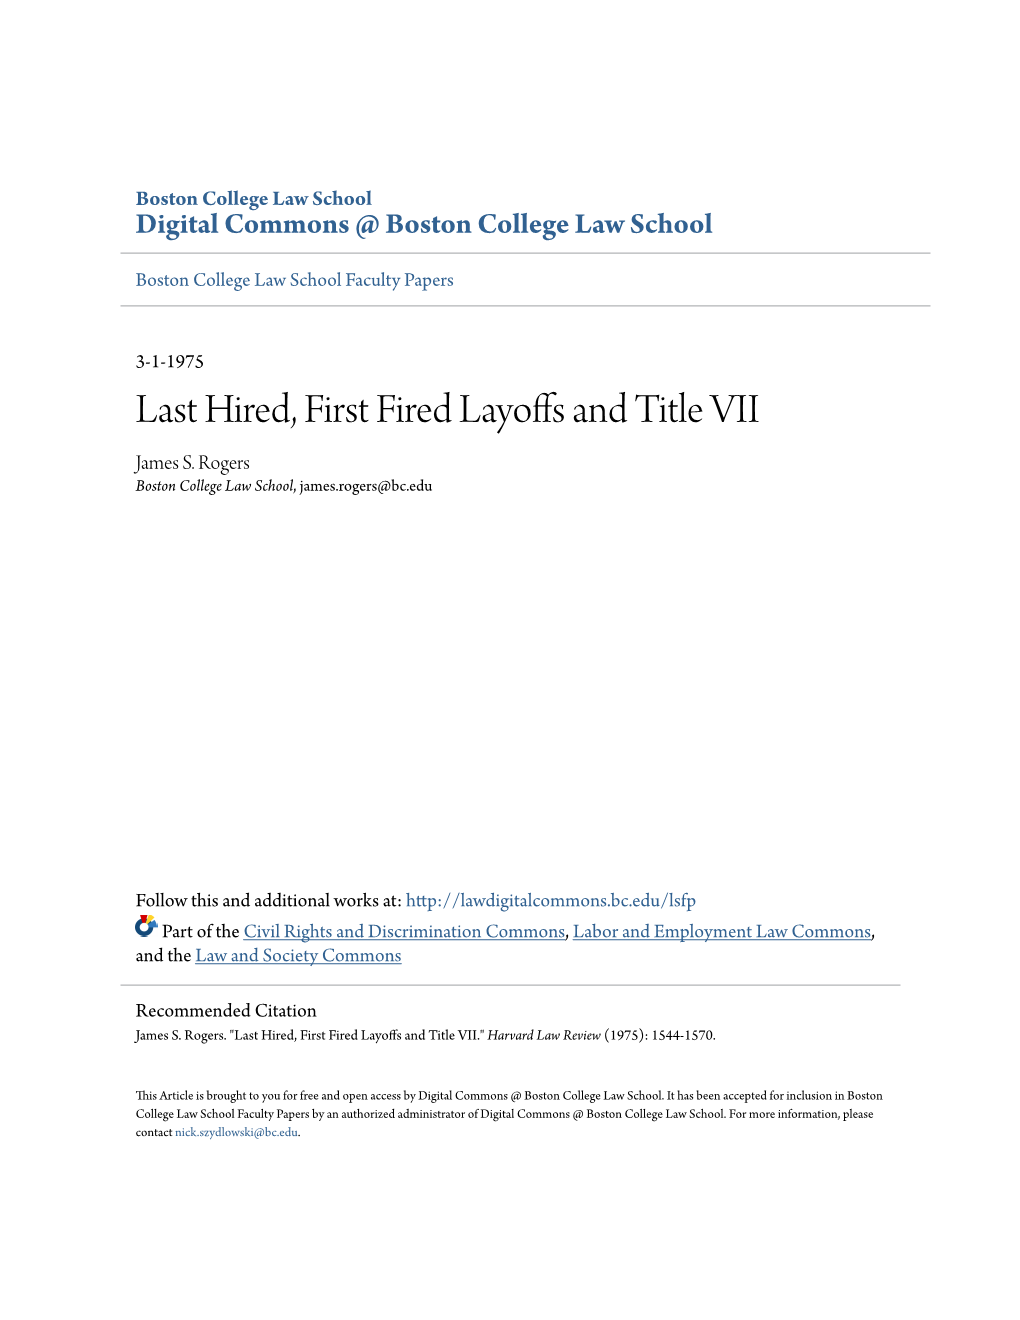 Last Hired, First Fired Layoffs and Title VII James S